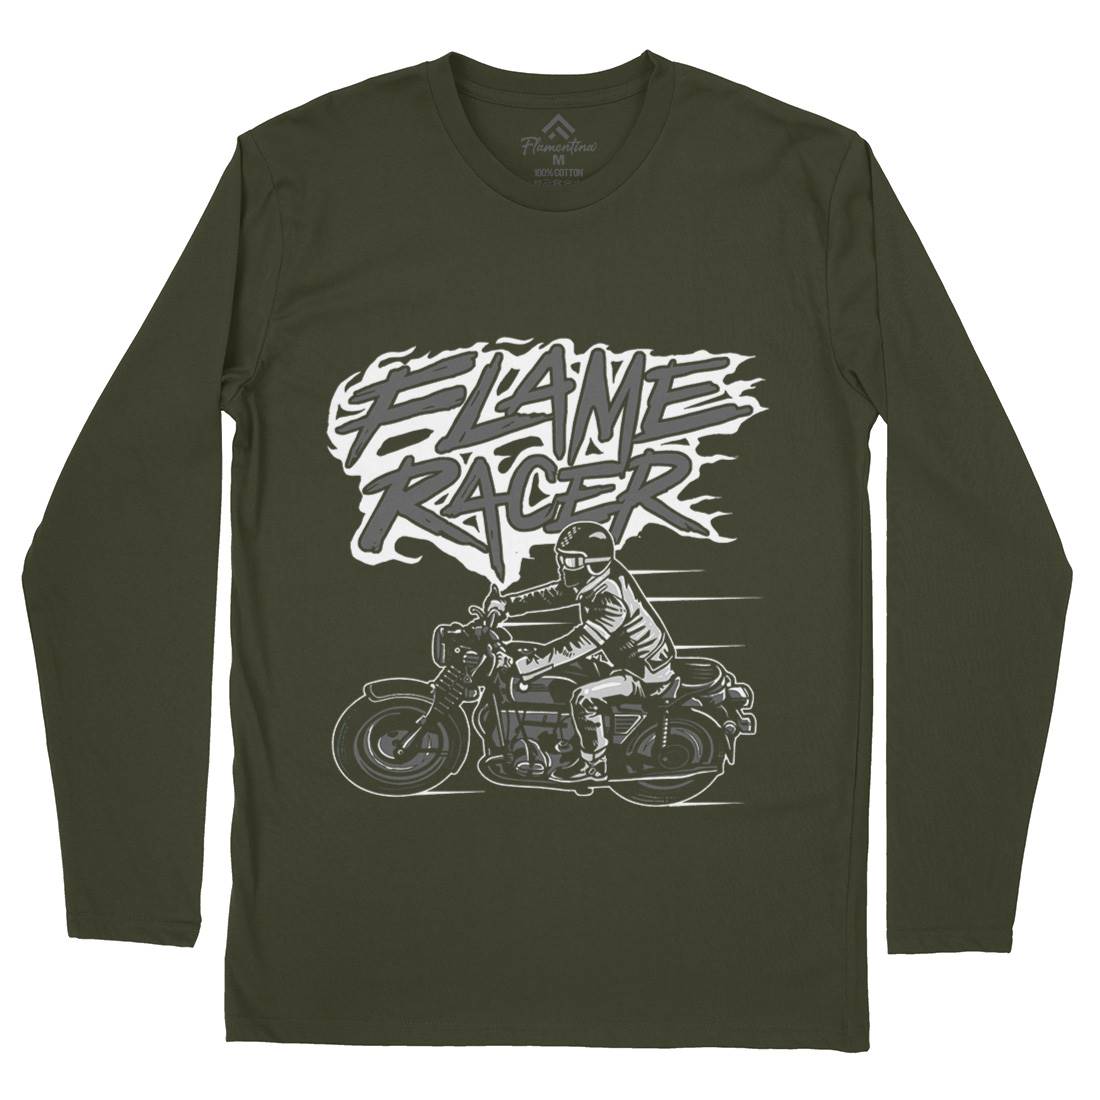 Flame Racer Mens Long Sleeve T-Shirt Motorcycles A530